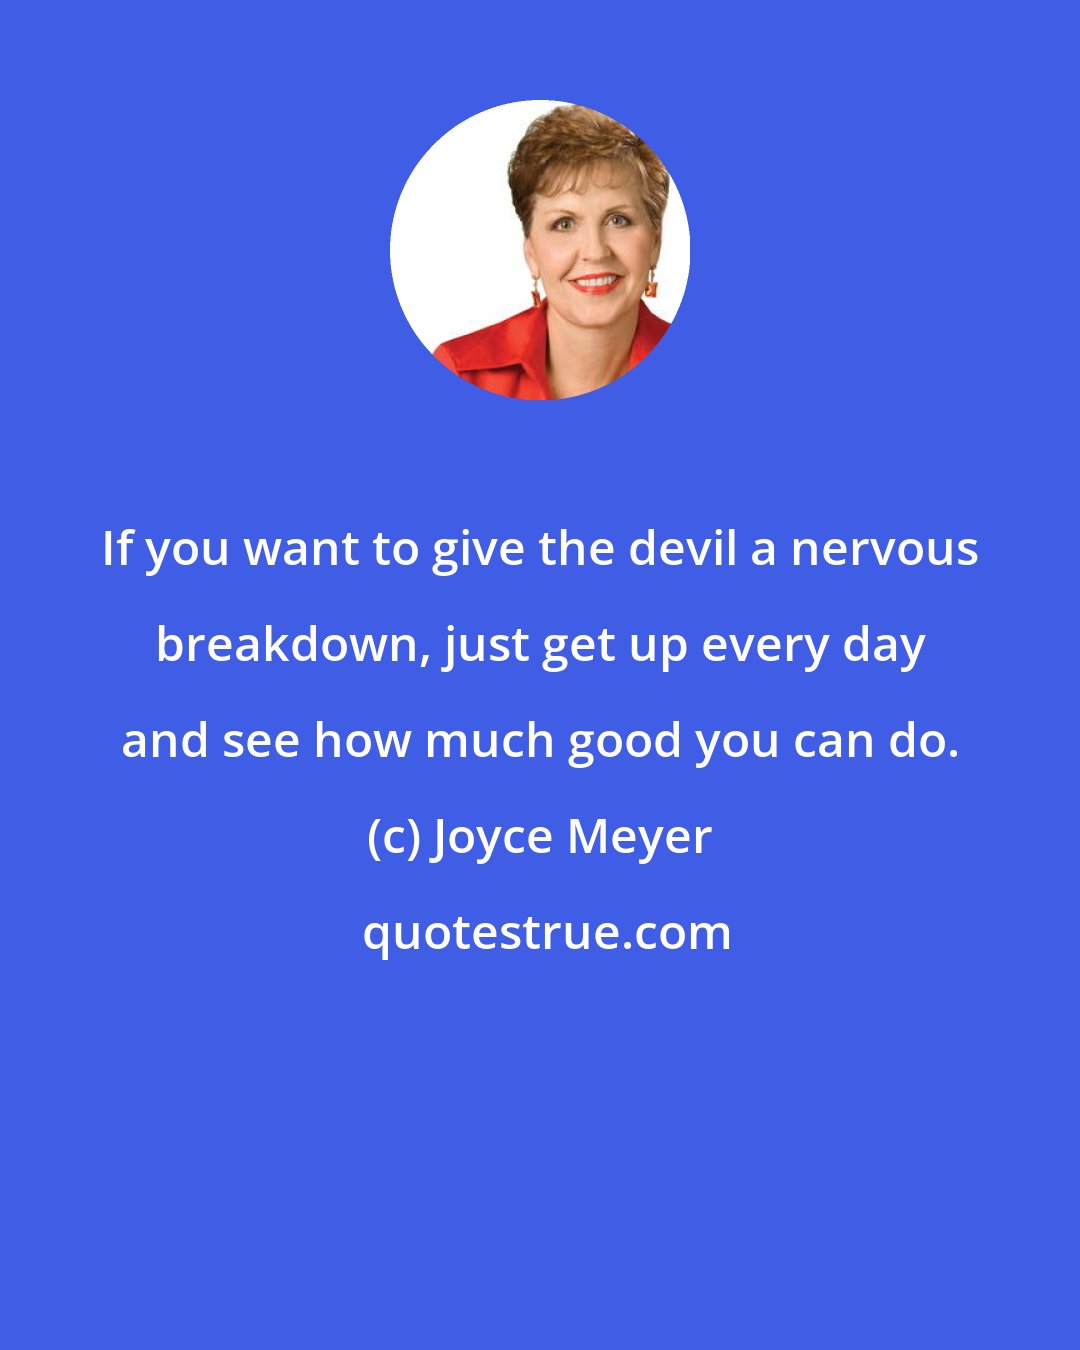 Joyce Meyer: If you want to give the devil a nervous breakdown, just get up every day and see how much good you can do.